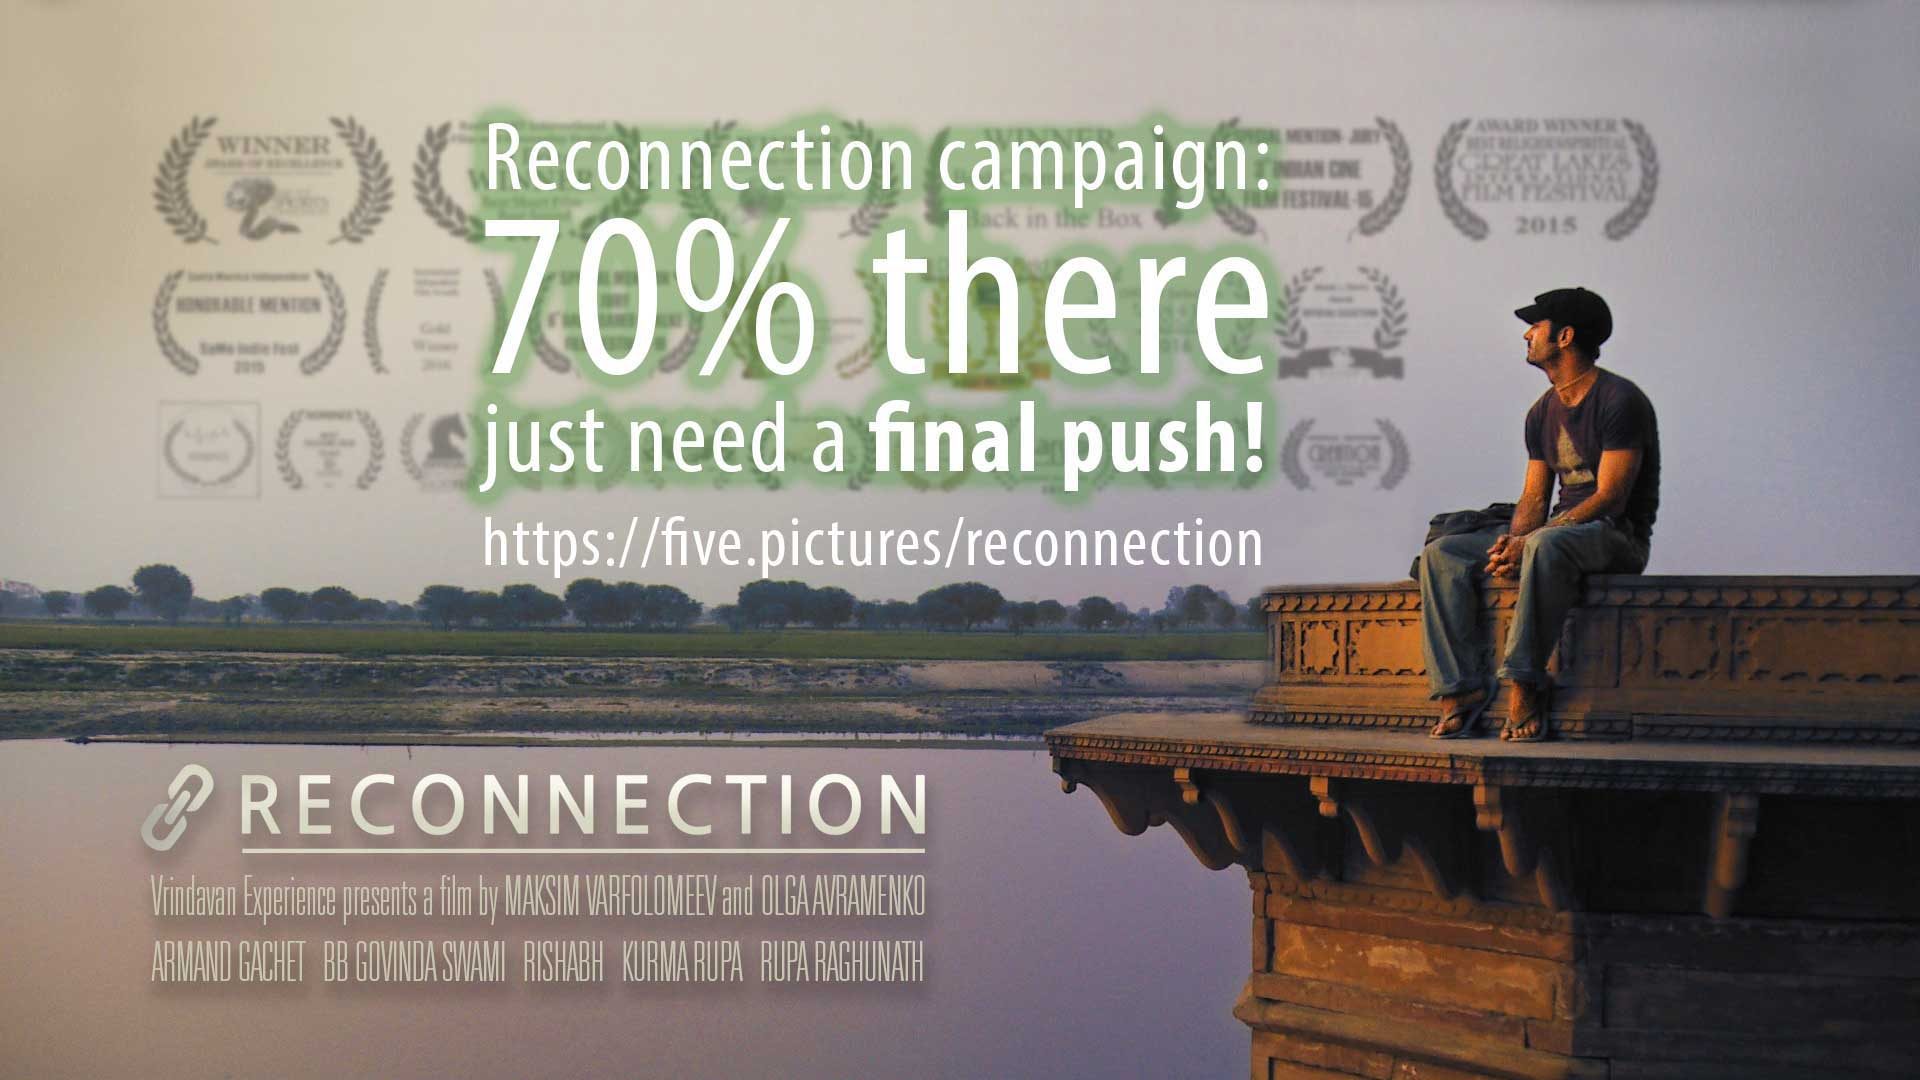 Reconnection campaign: 70% there, just need a final push! Reconnection, a multi-award winning film, set in Vrindavan, gets closer to its release.